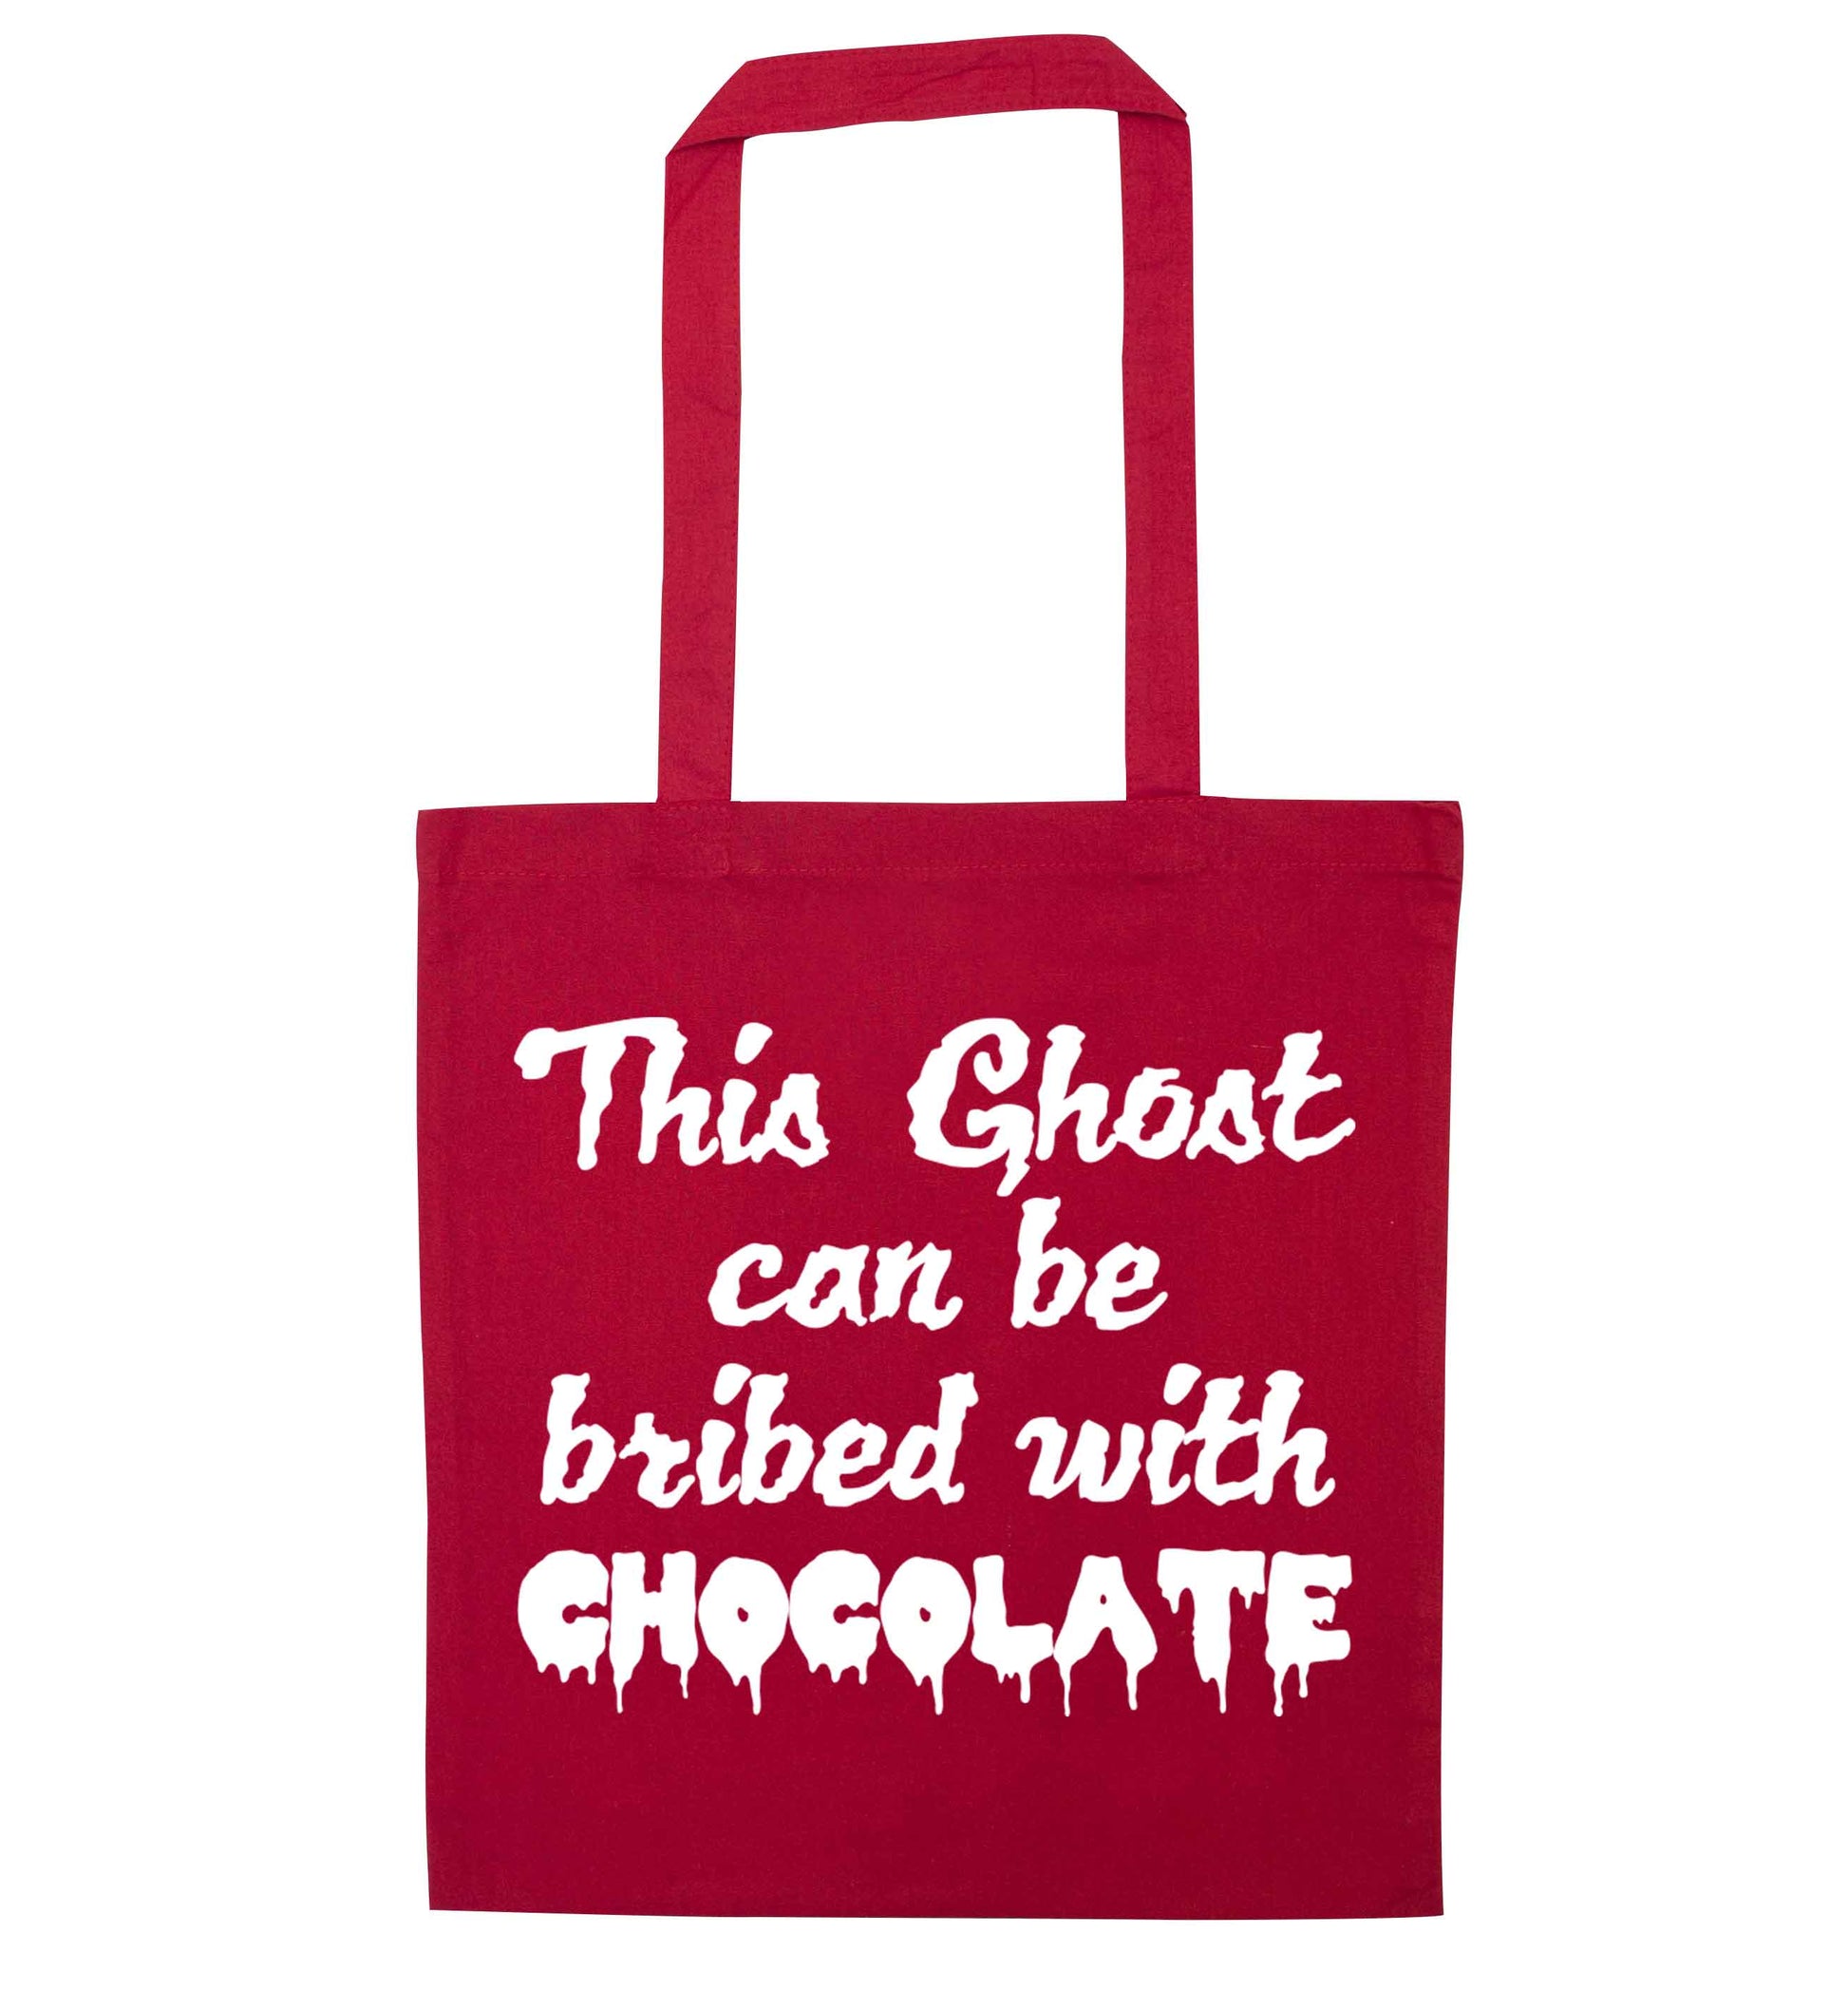 This ghost can be bribed with chocolate red tote bag